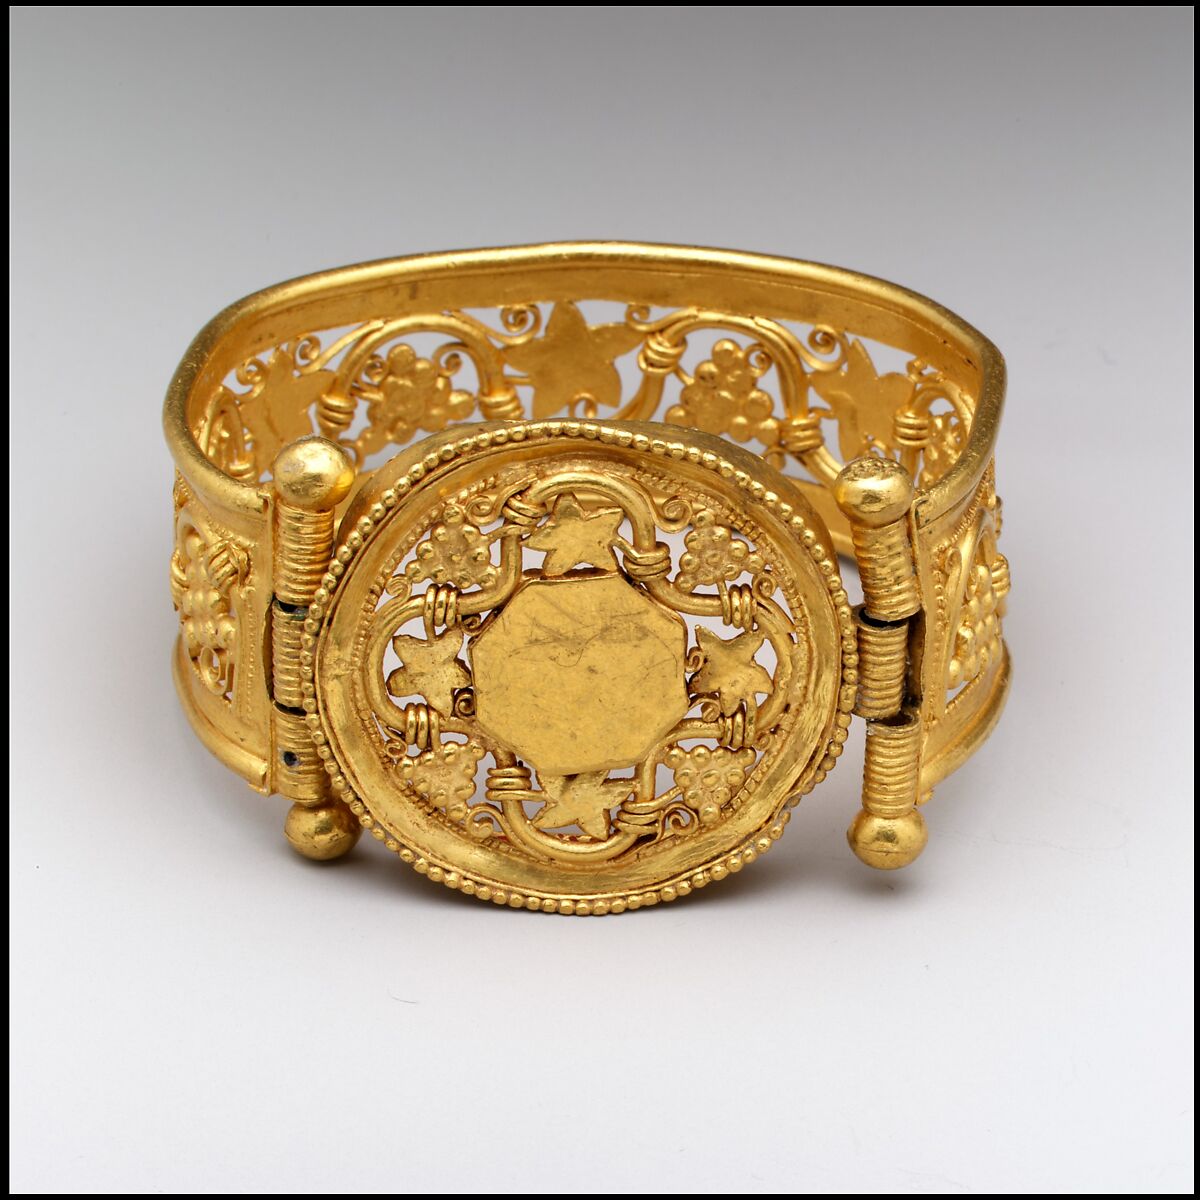 Bracelet with Grapevine Pattern, Gold - sheet, rod; engraved; wire - plain, beaded; granulation; strip - triangular sectioned., Byzantine 